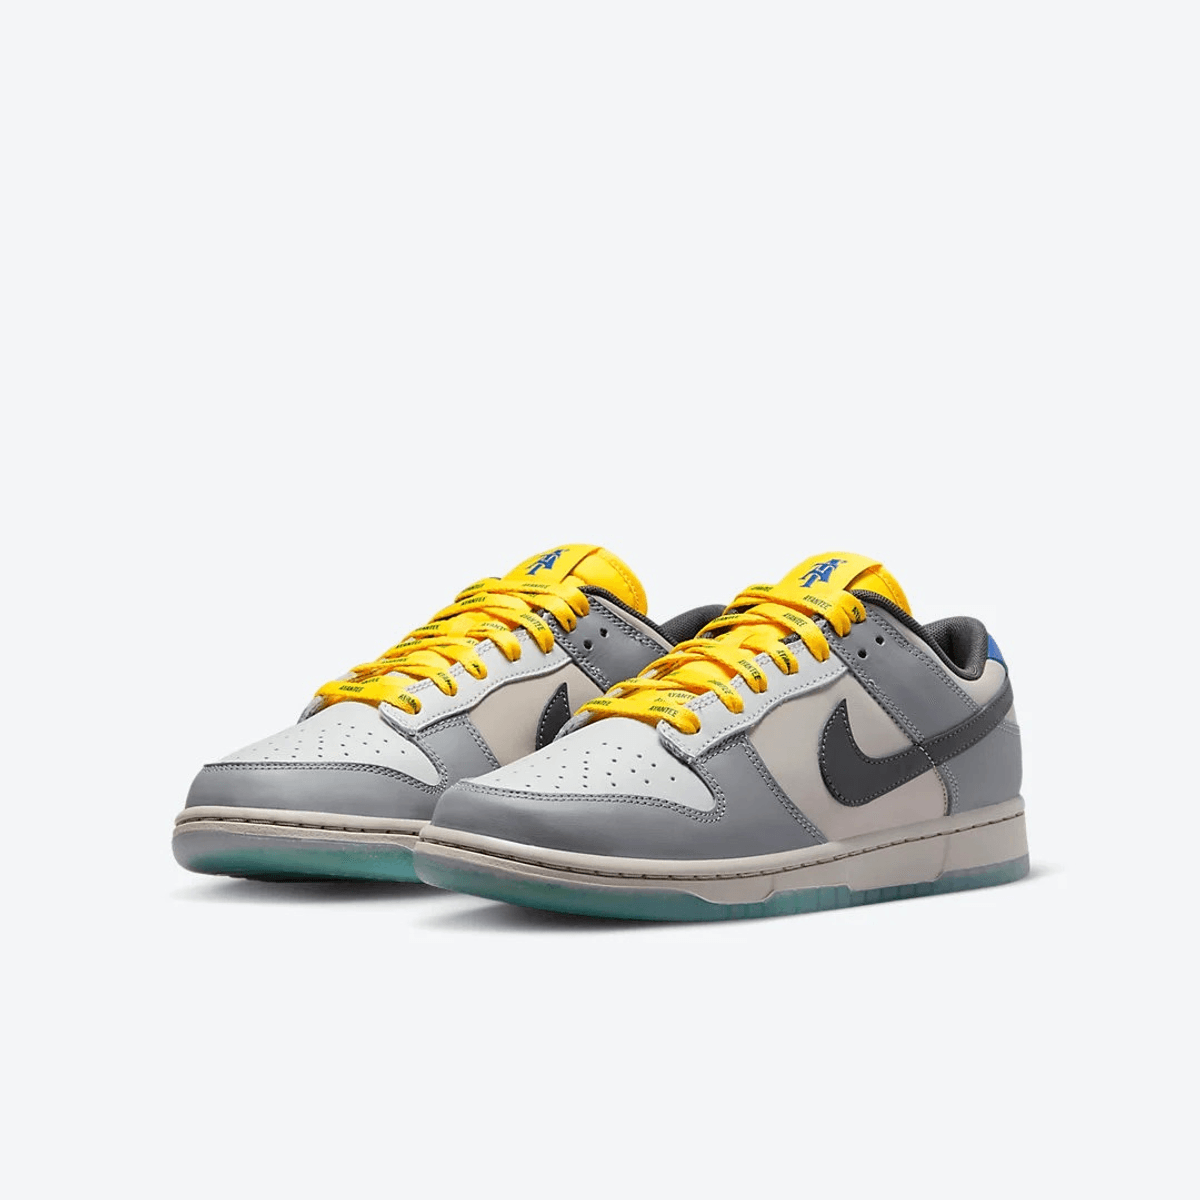 The Nike Dunk Low North Carolina A&T Honors HBCUs